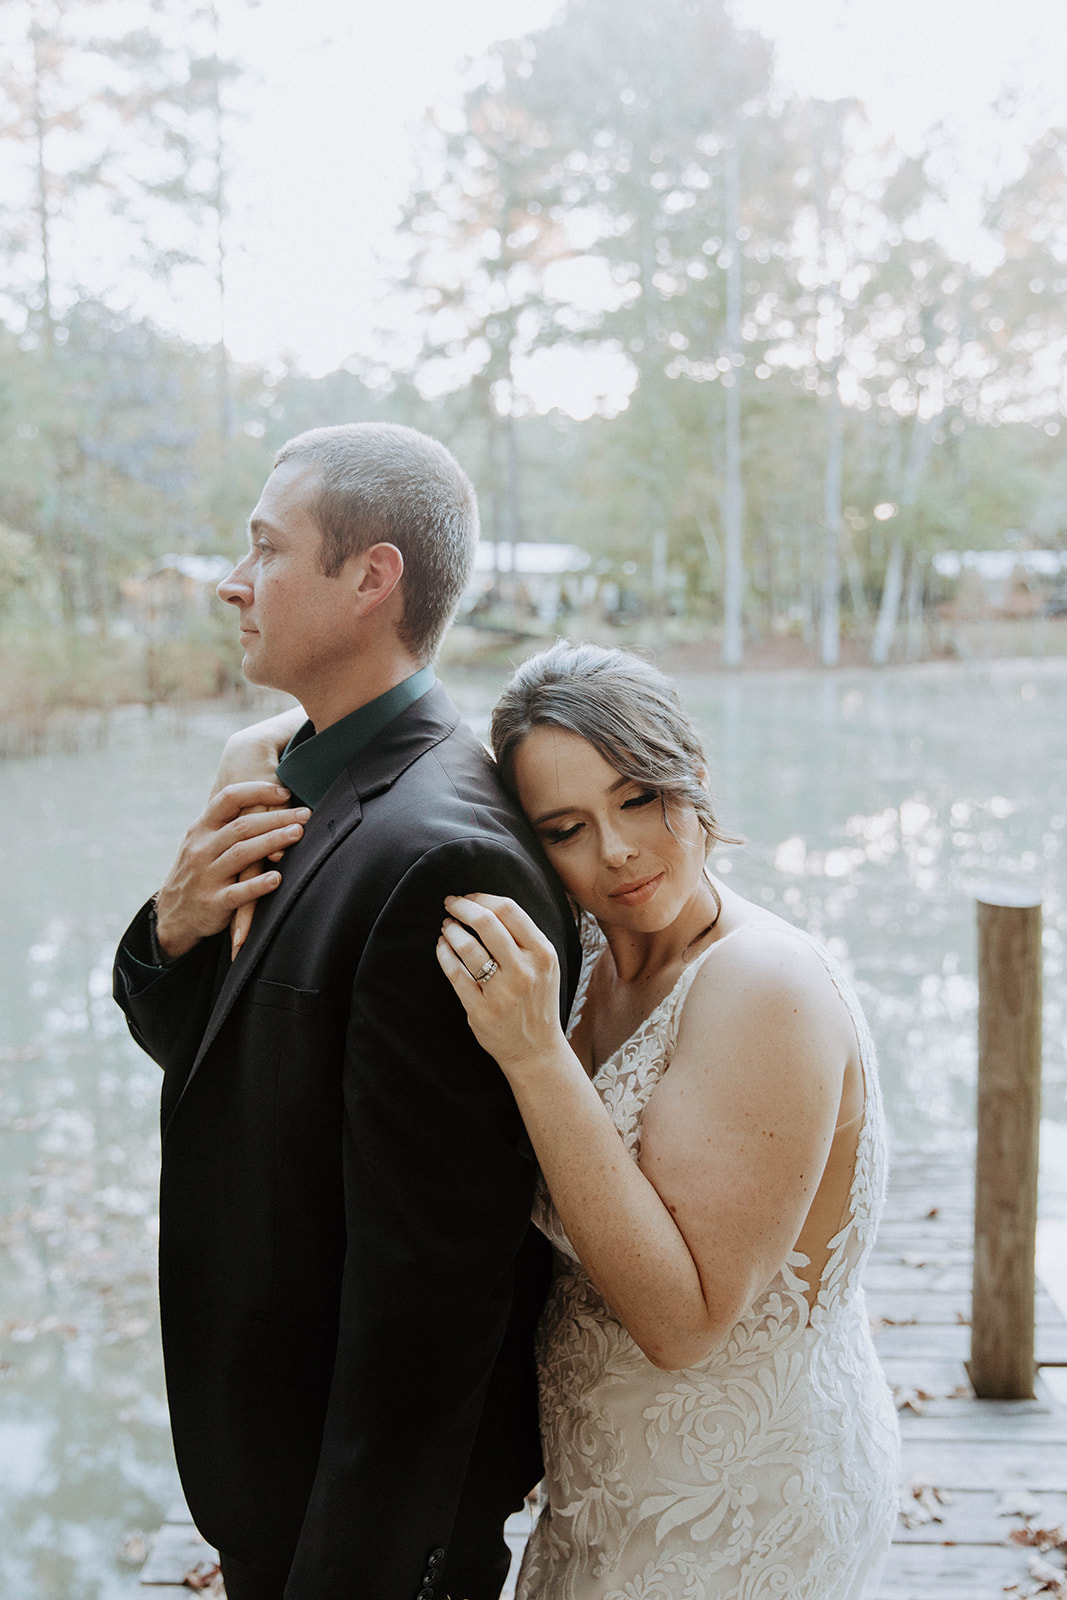 A bride in a lace dress and a groom in a black suit stand close together on a leaf-covered dock by a lake with trees in the background. The bride holds a bouquet of flowers.